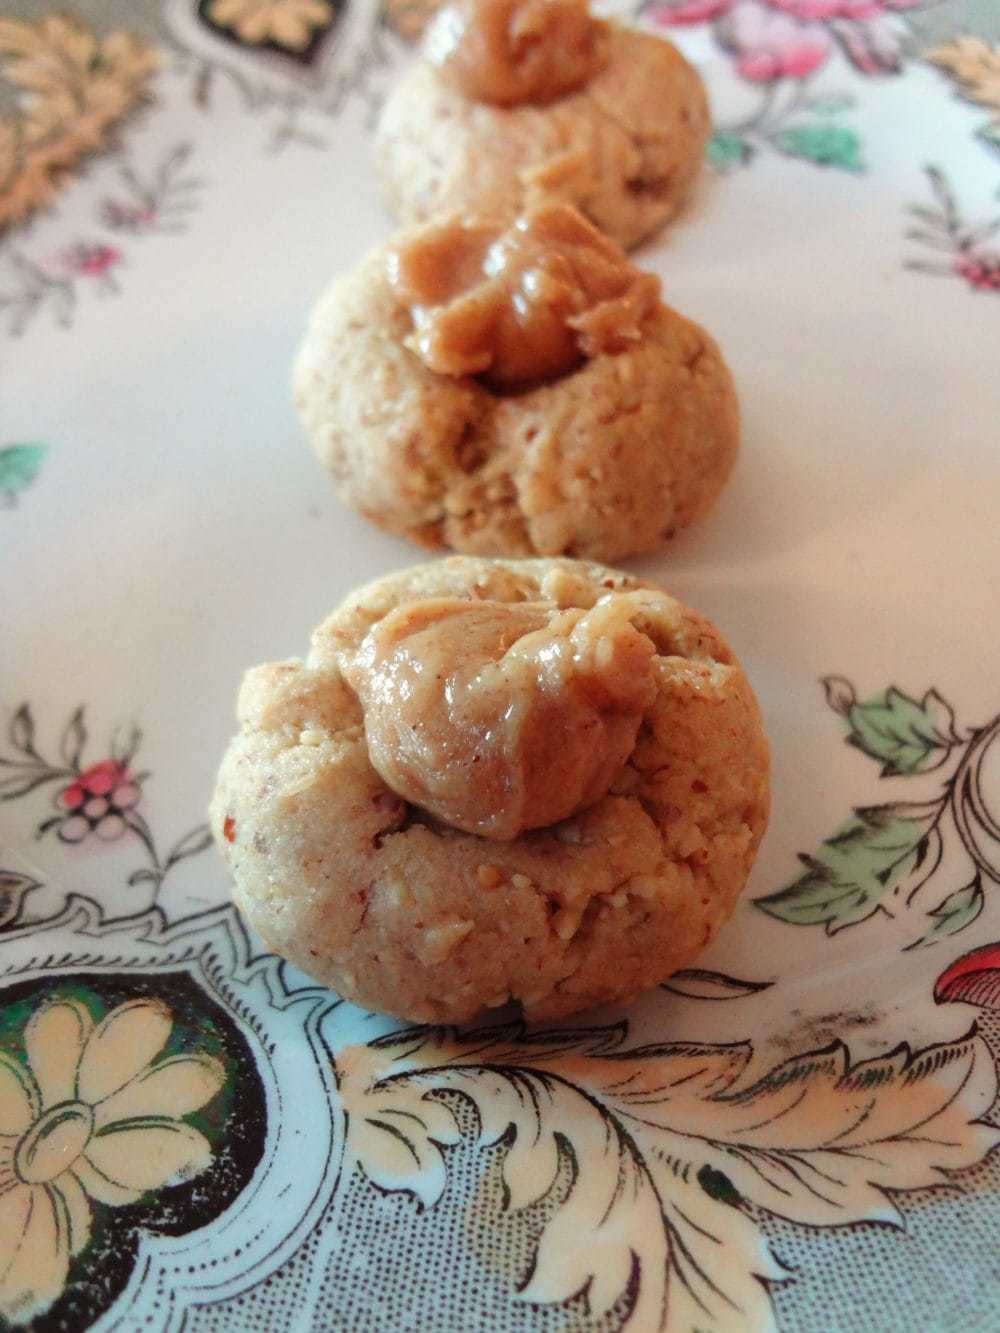 A plate of cookies with peanut butter on it.